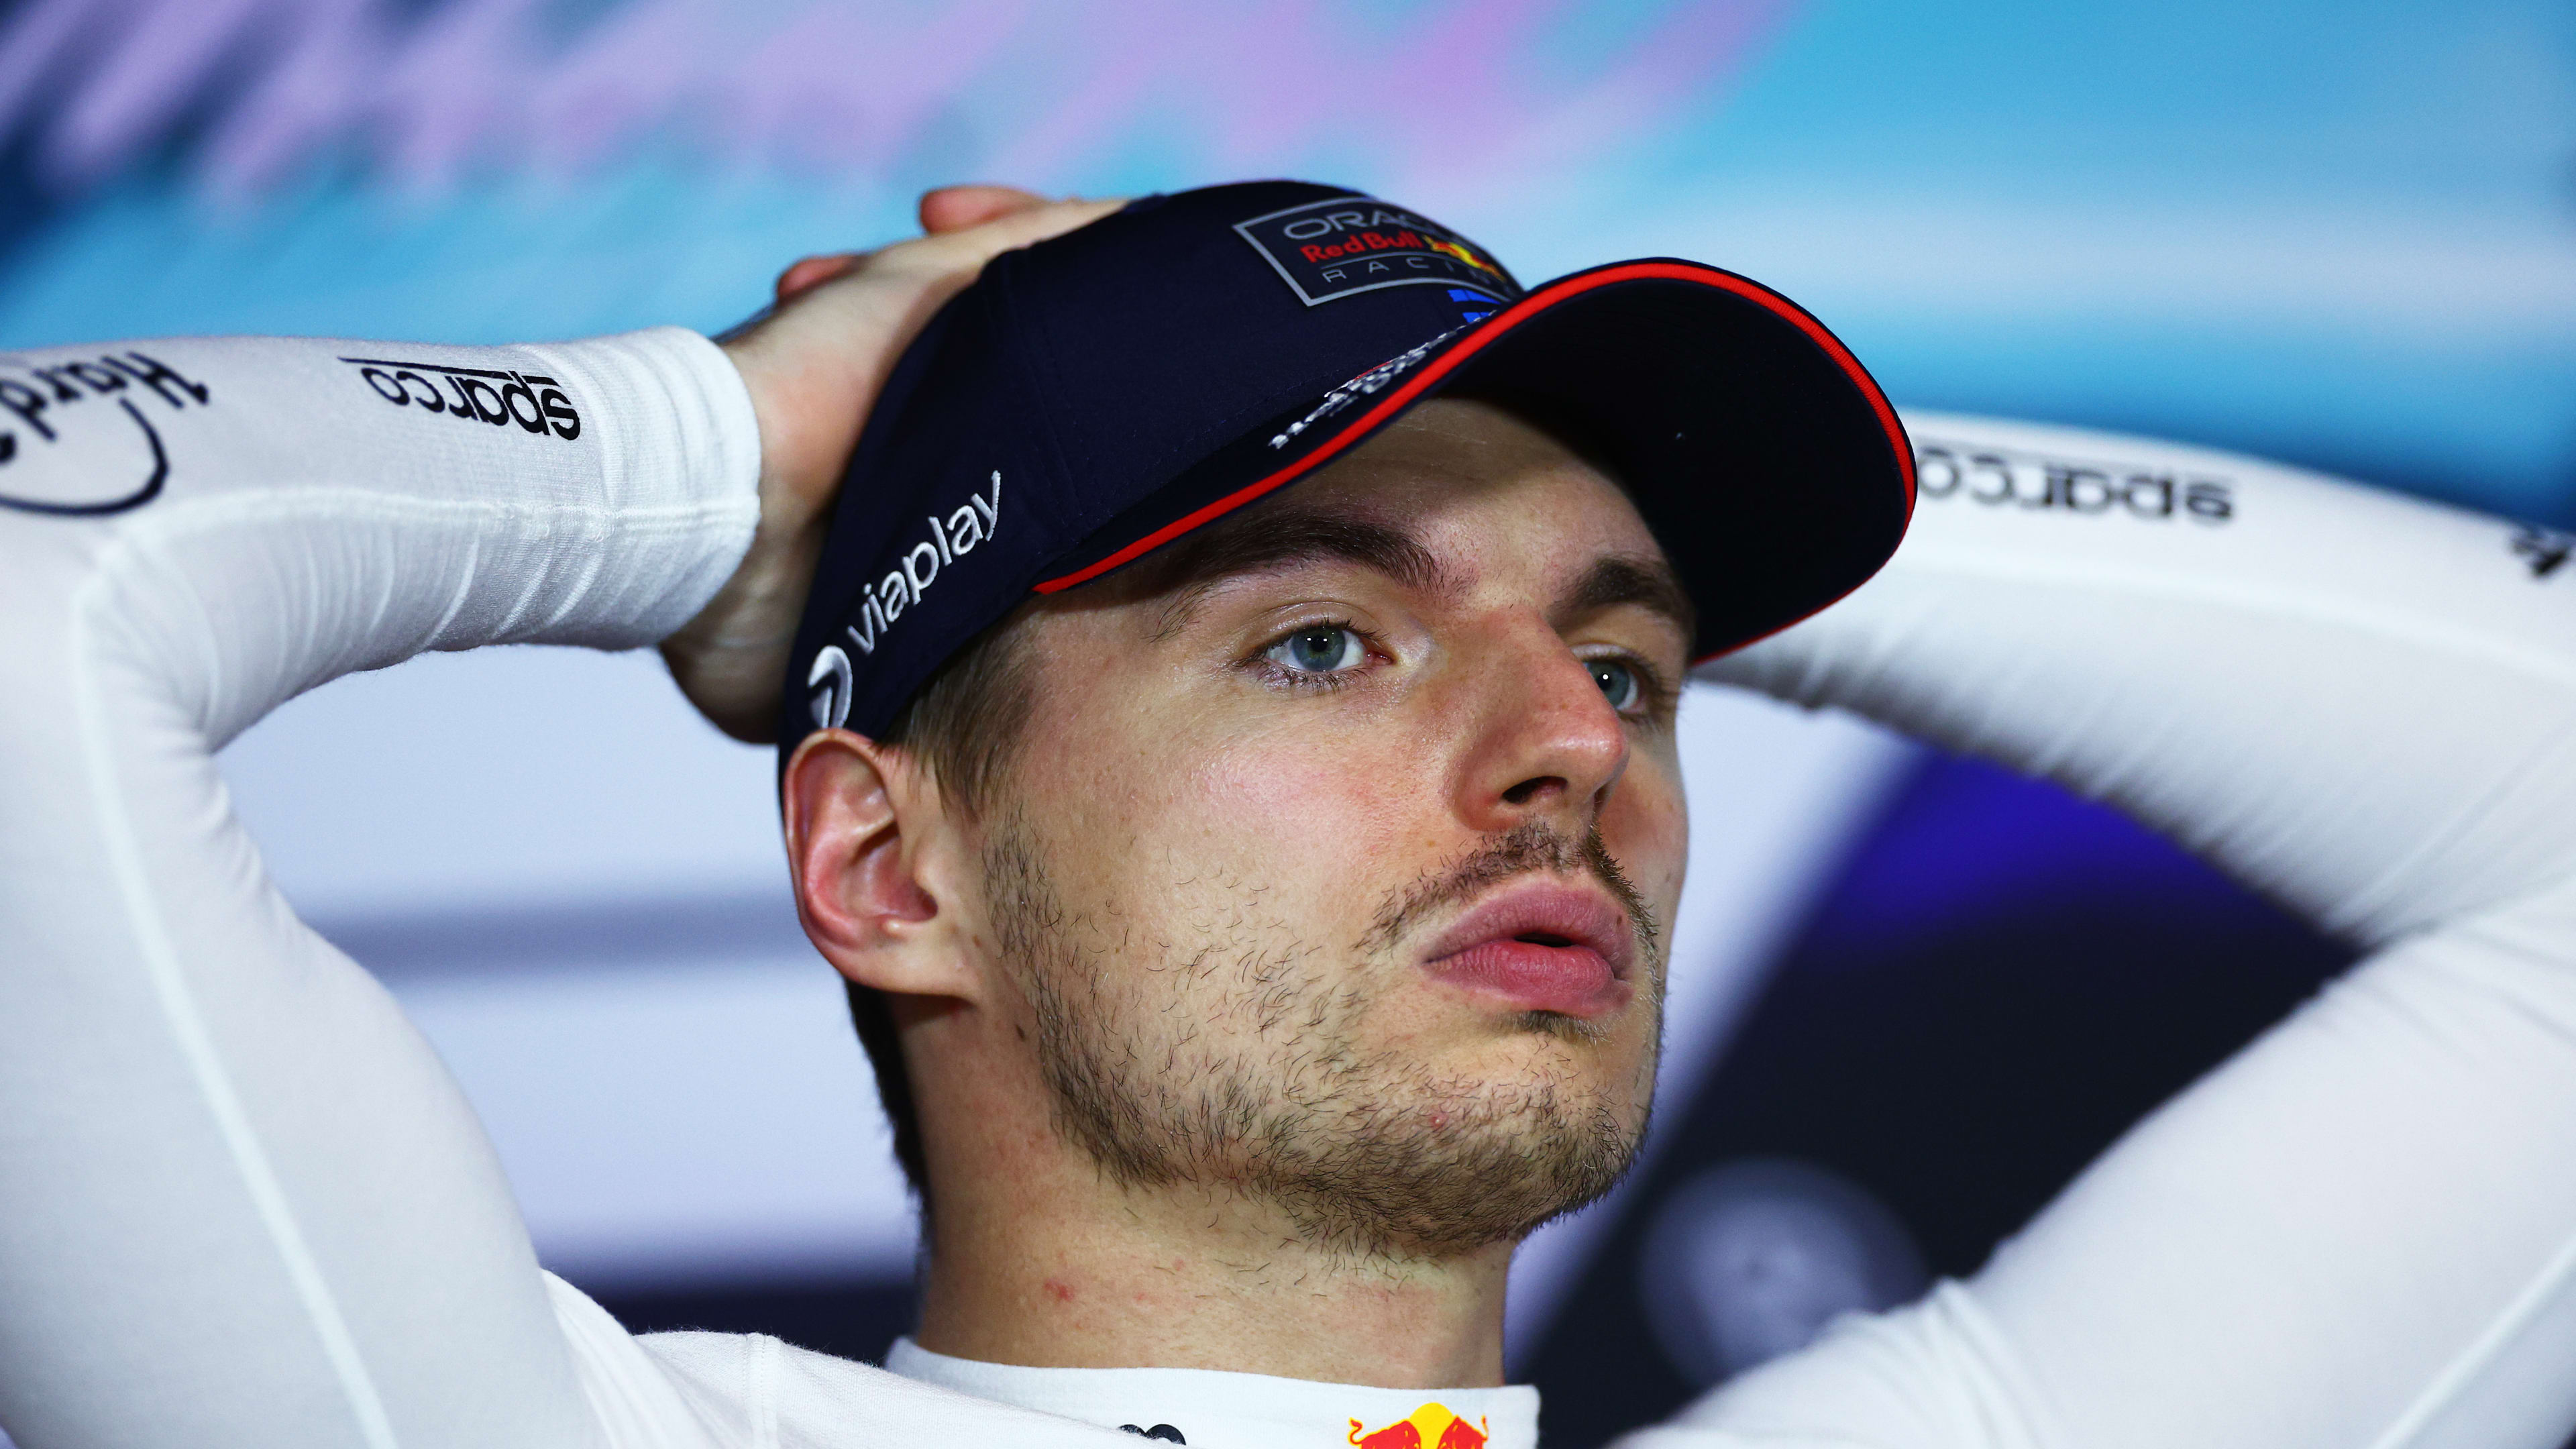 Verstappen responds to more questions about his F1 future as he insists change of teams ‘not on my mind’